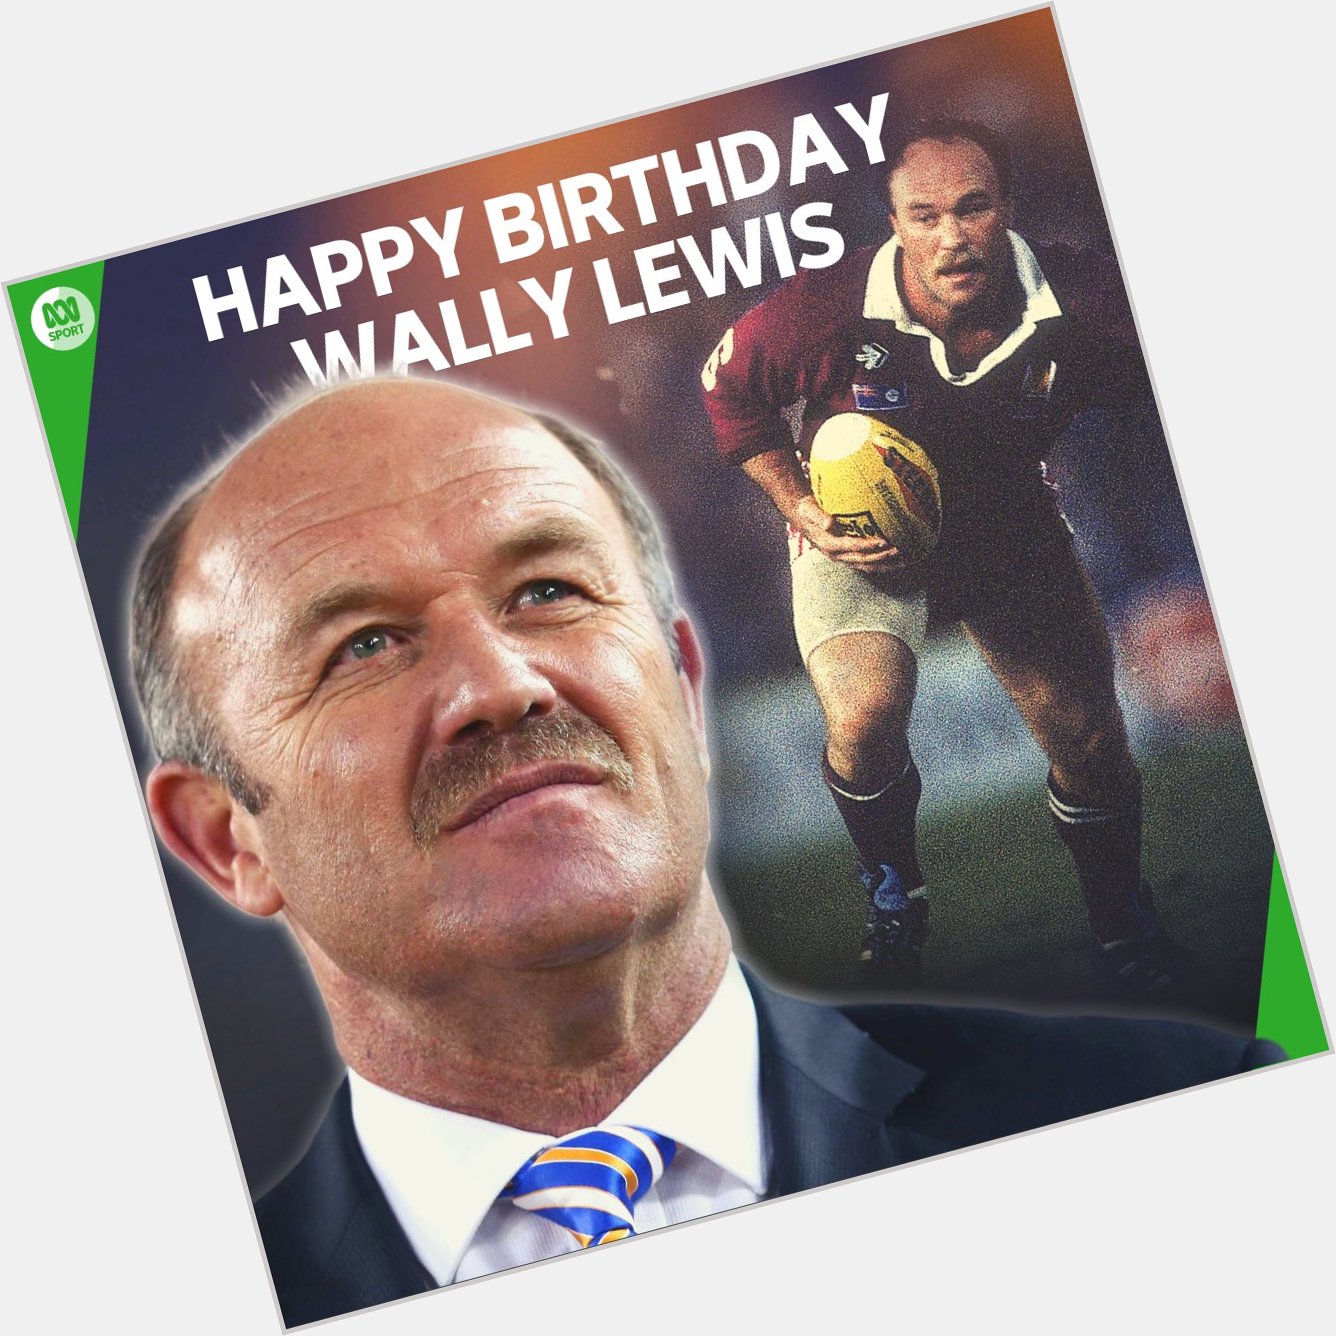 Happy Birthday to the King Where does Wally Lewis rank on your list of rugby league greats?  